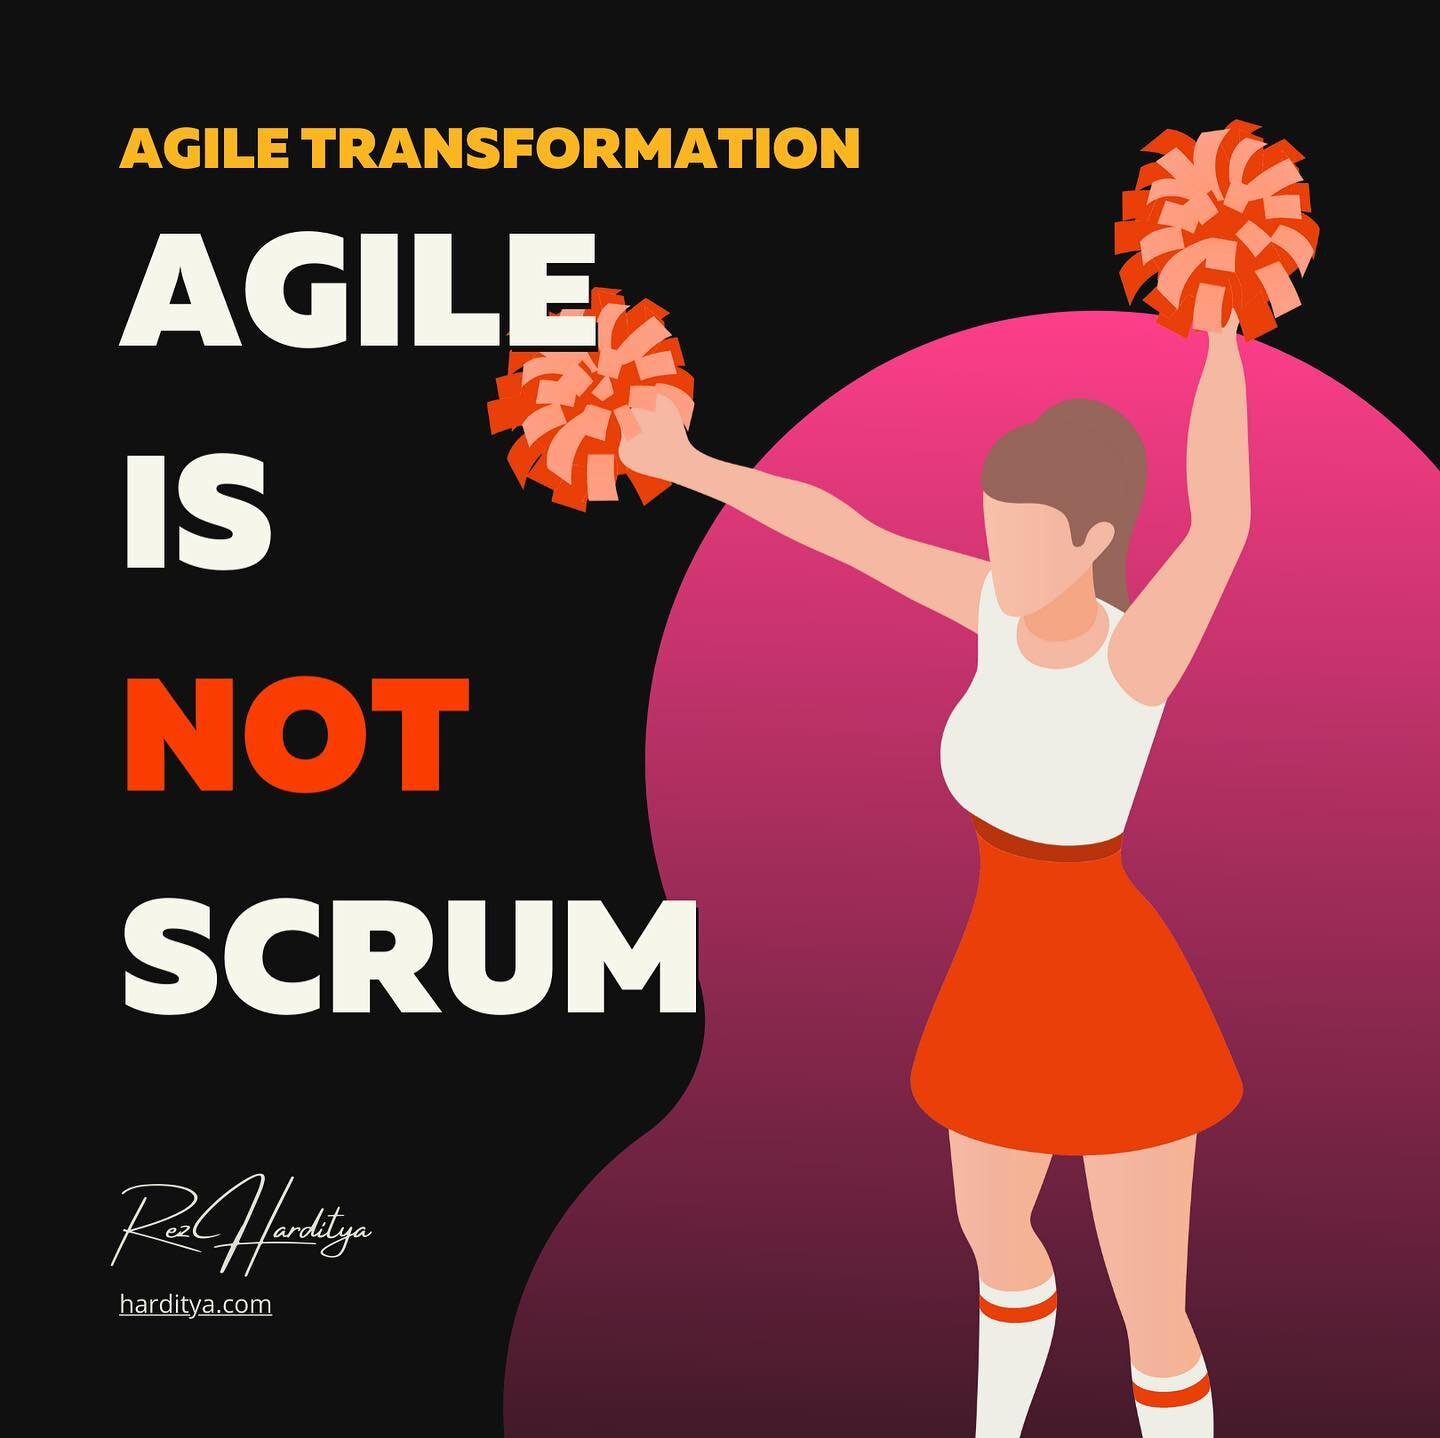 Agile is too complex.
Agile is too difficult.
Agile doesn&rsquo;t work in our team.

These are common challenges leaders and teams face in trying out agile.

In reality, we have full control over how simple or complex we want to do agile. Here are a 